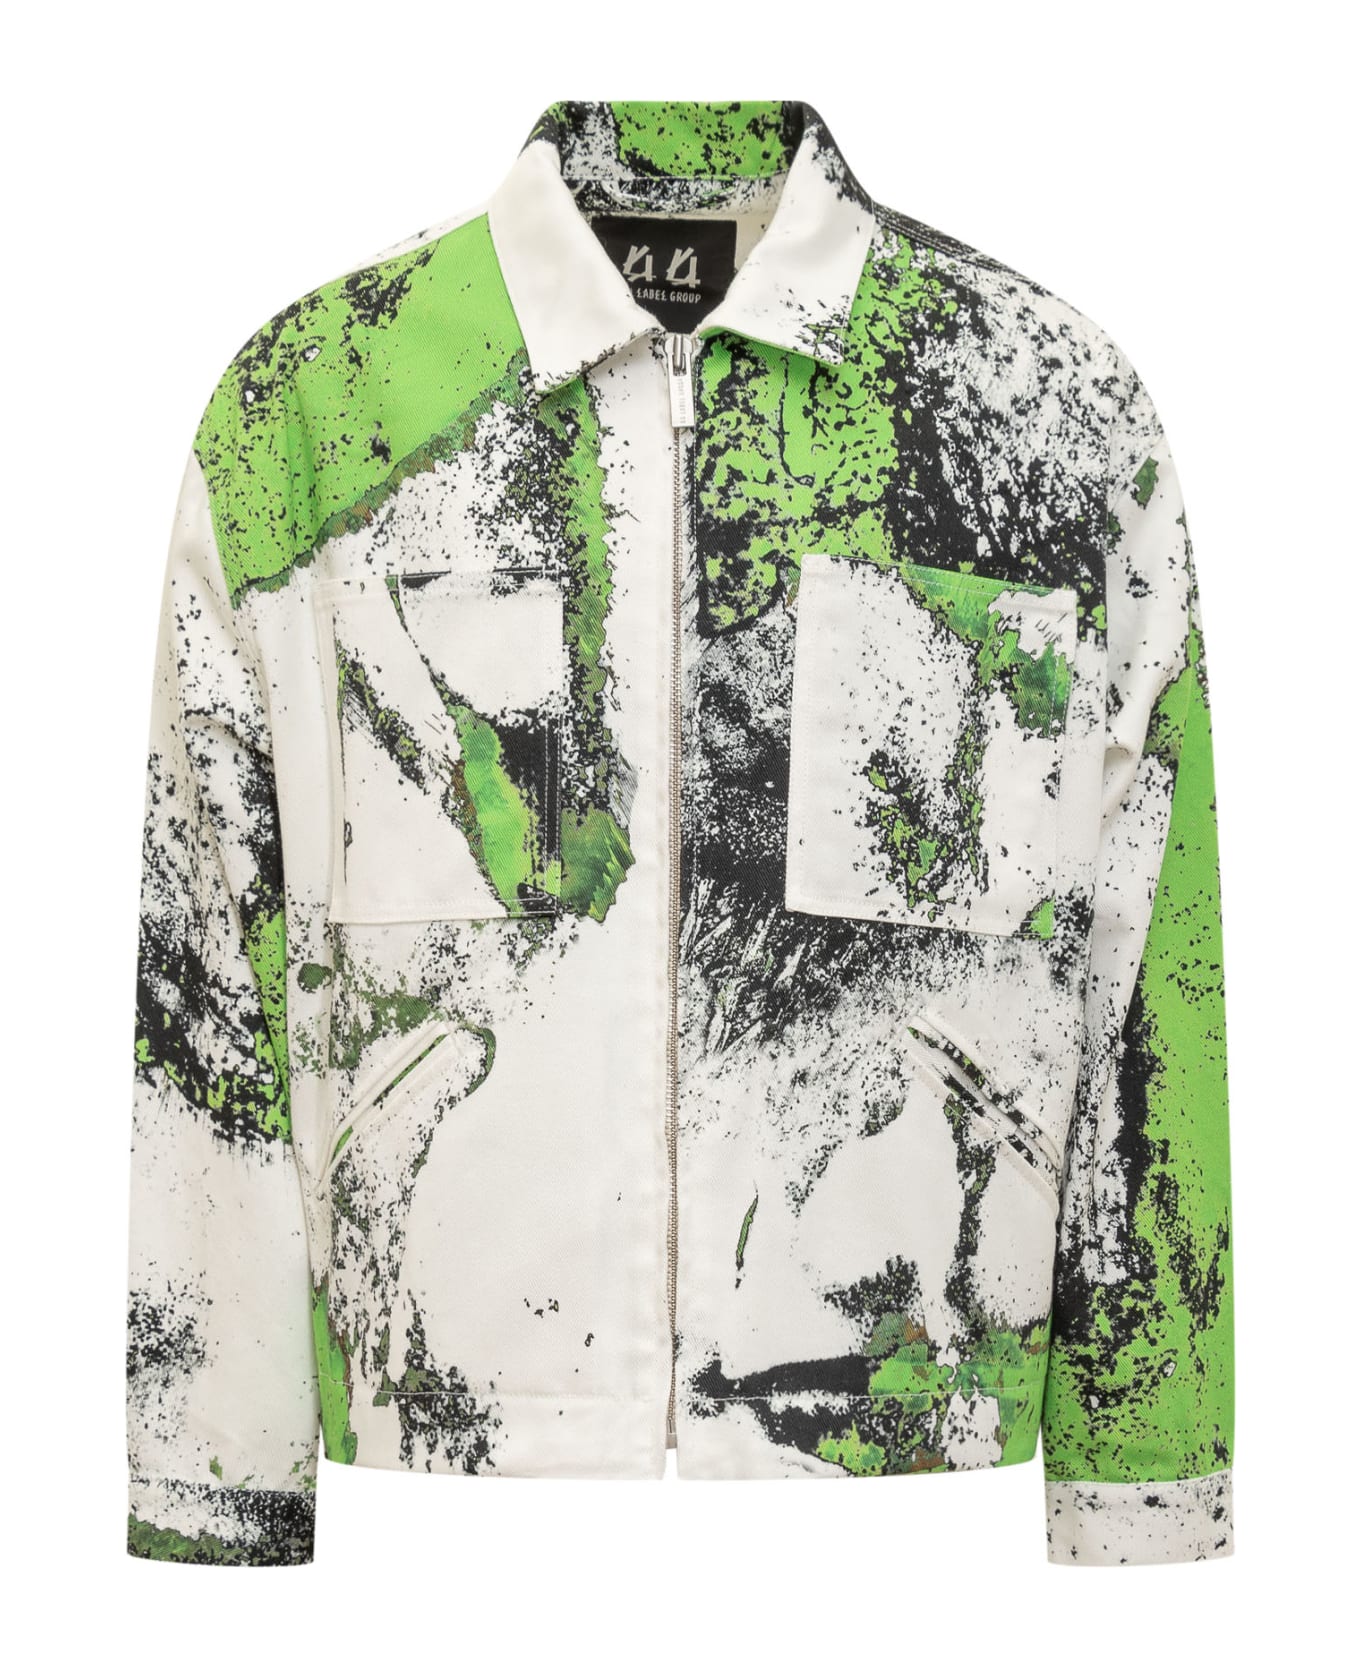 44 Label Group Jacket With Corrosive Effect - WHITE-GRUNGE GREEN